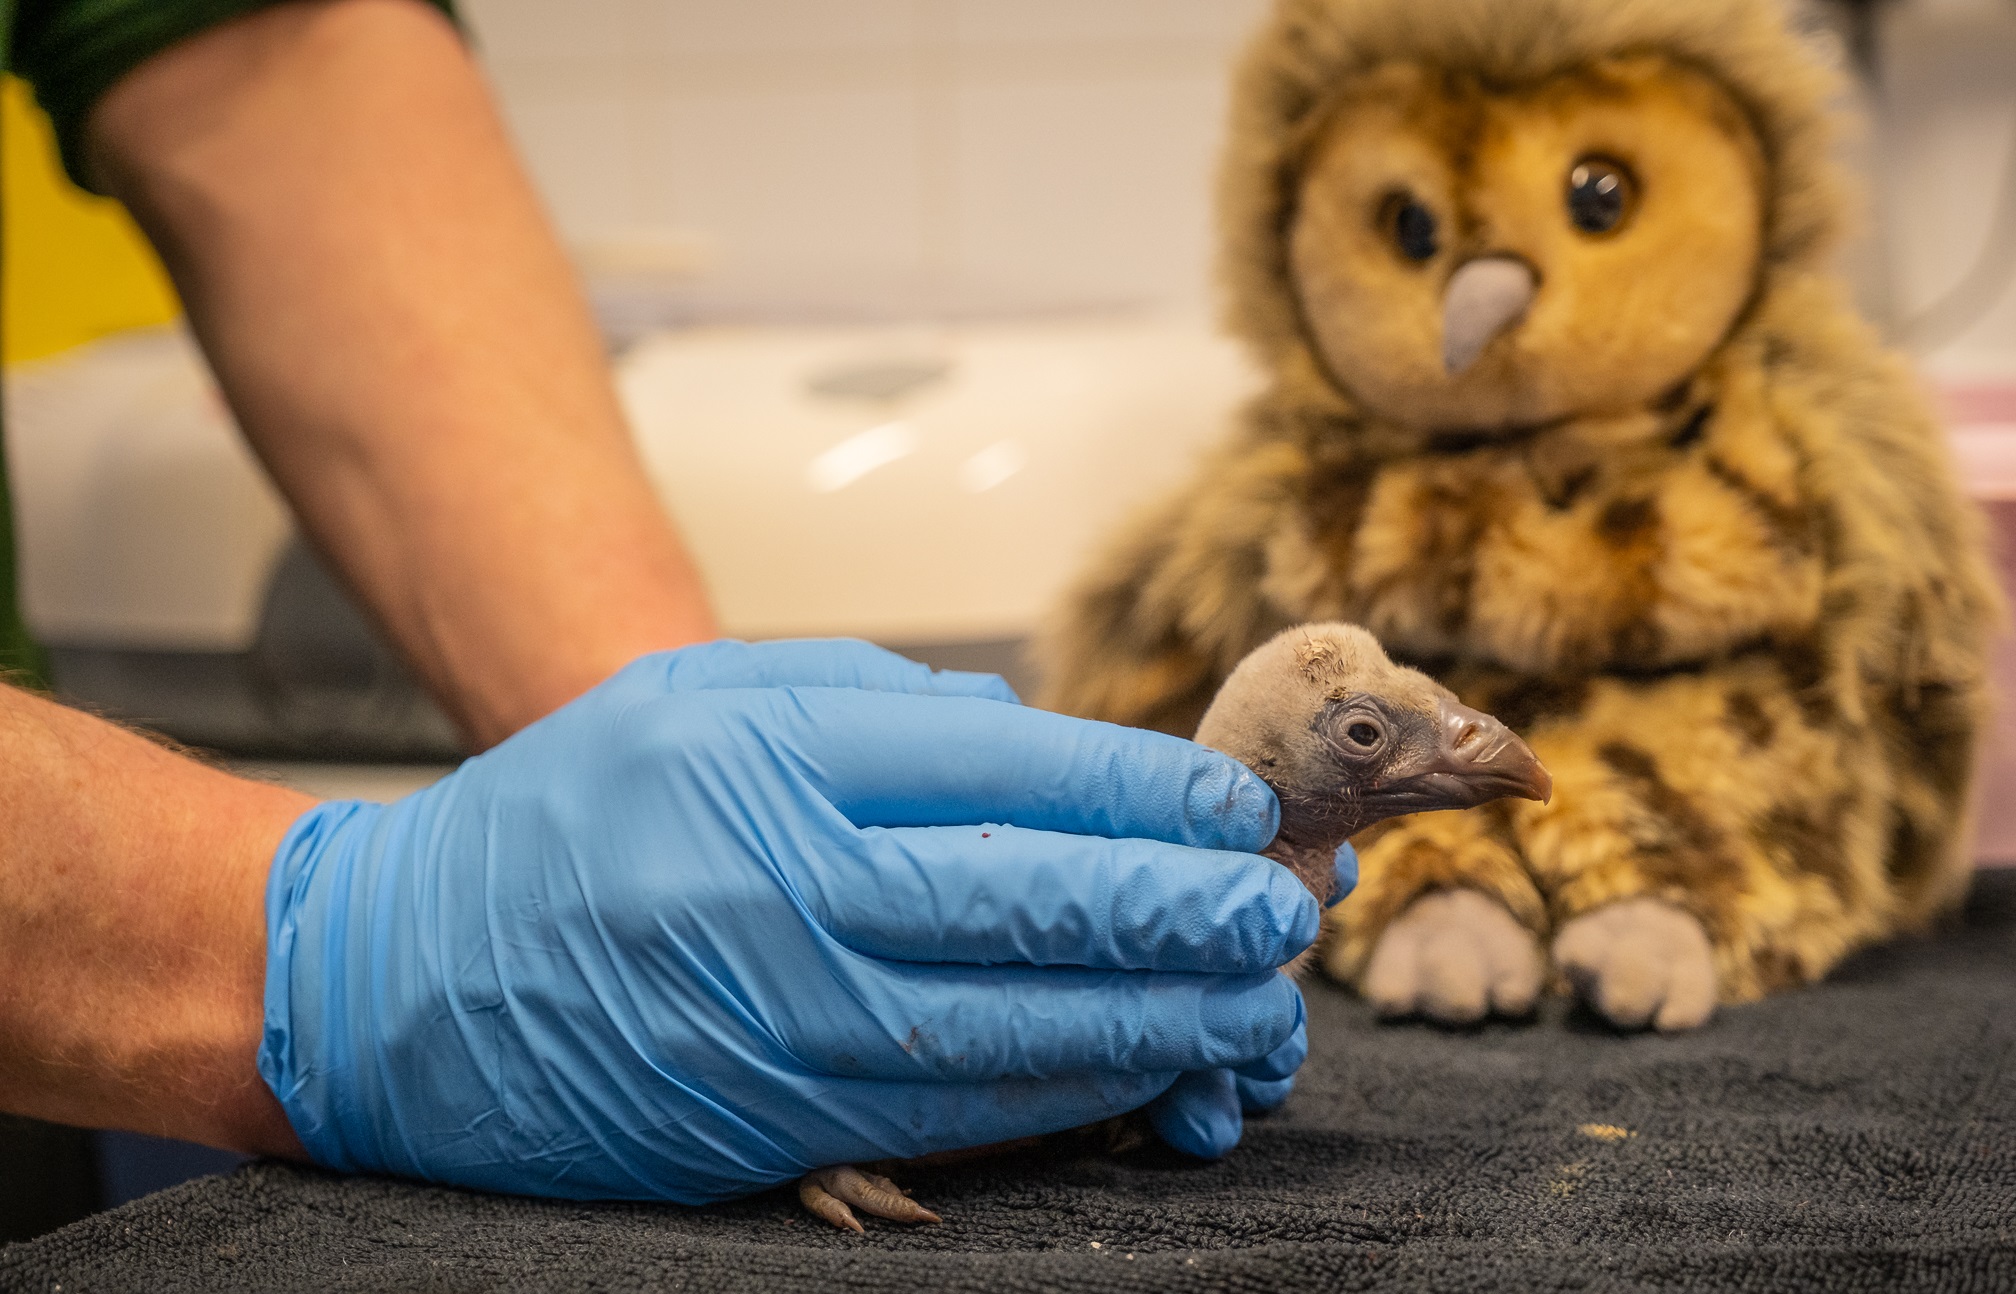 Egbert's birth was hailed a 'brilliant' conservation success (ZSL London Zoo)